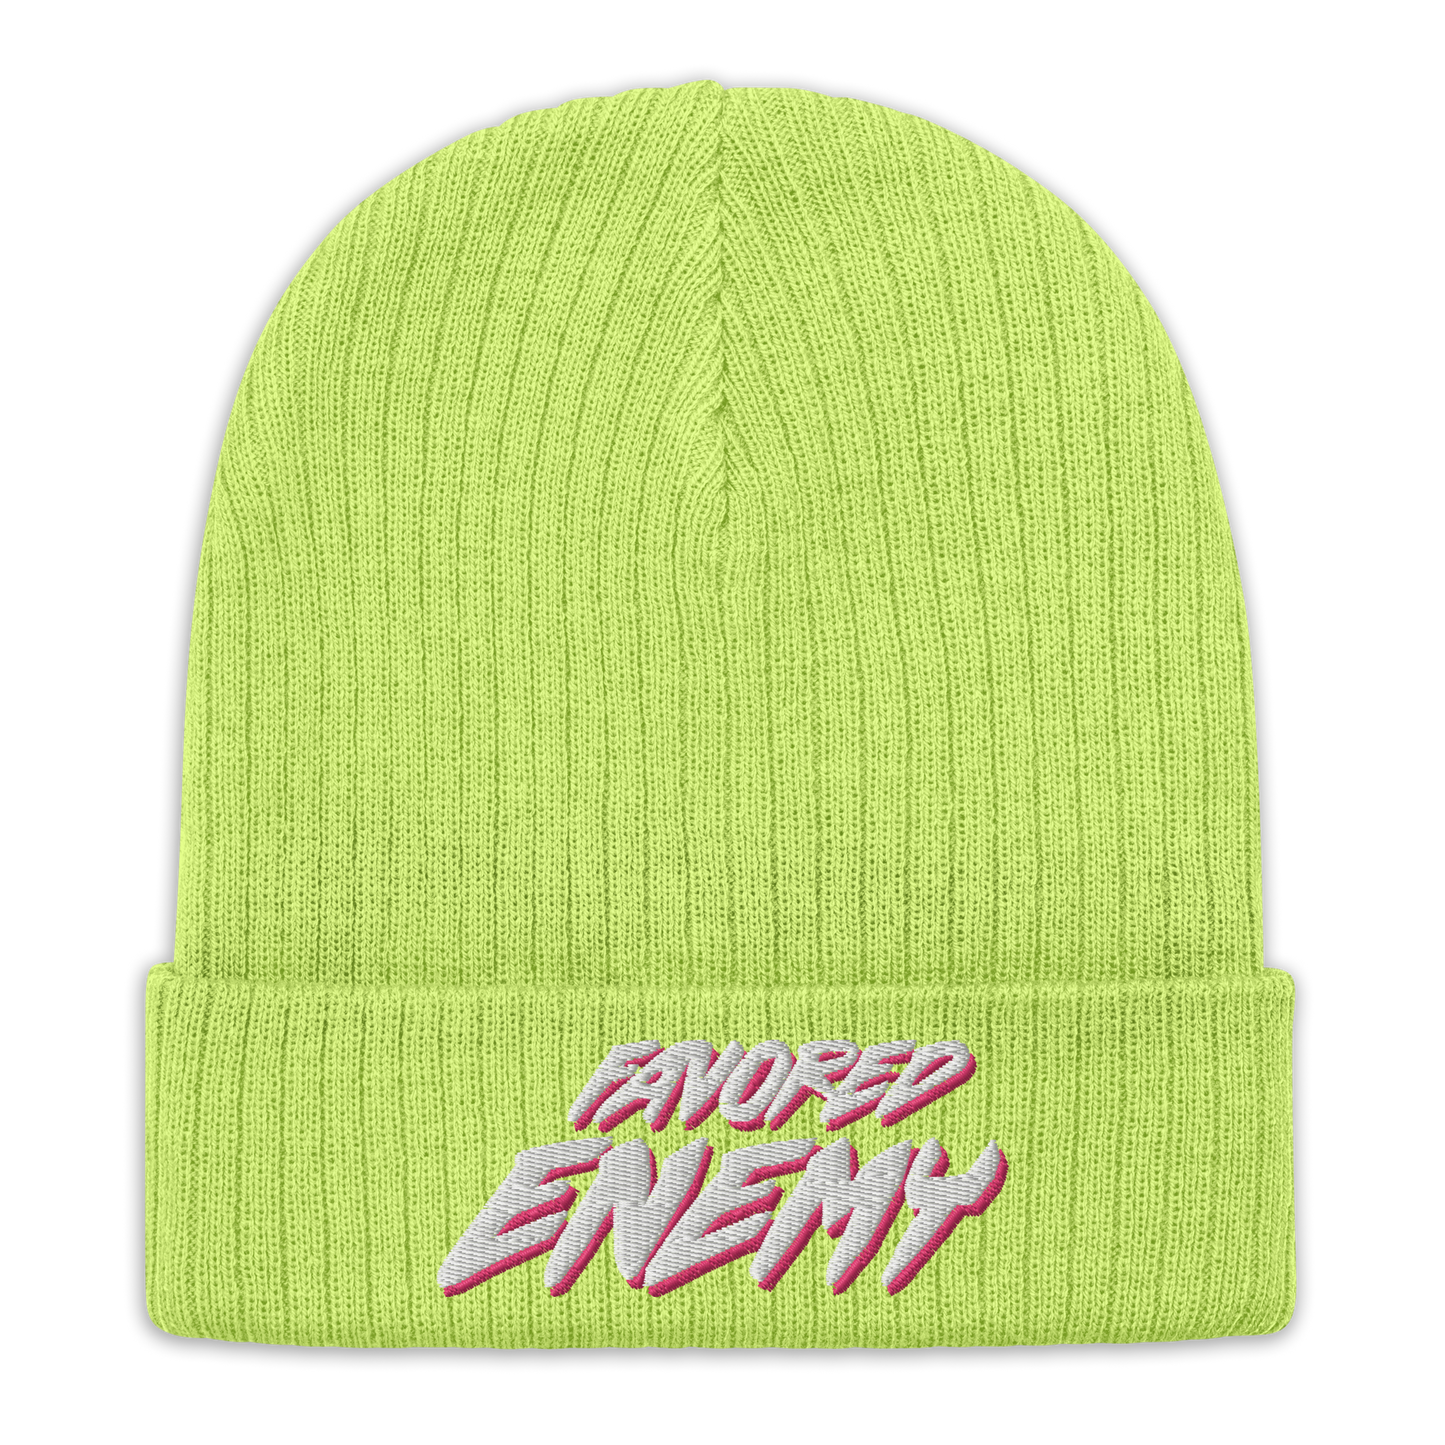 Favored Enemy || Beanie